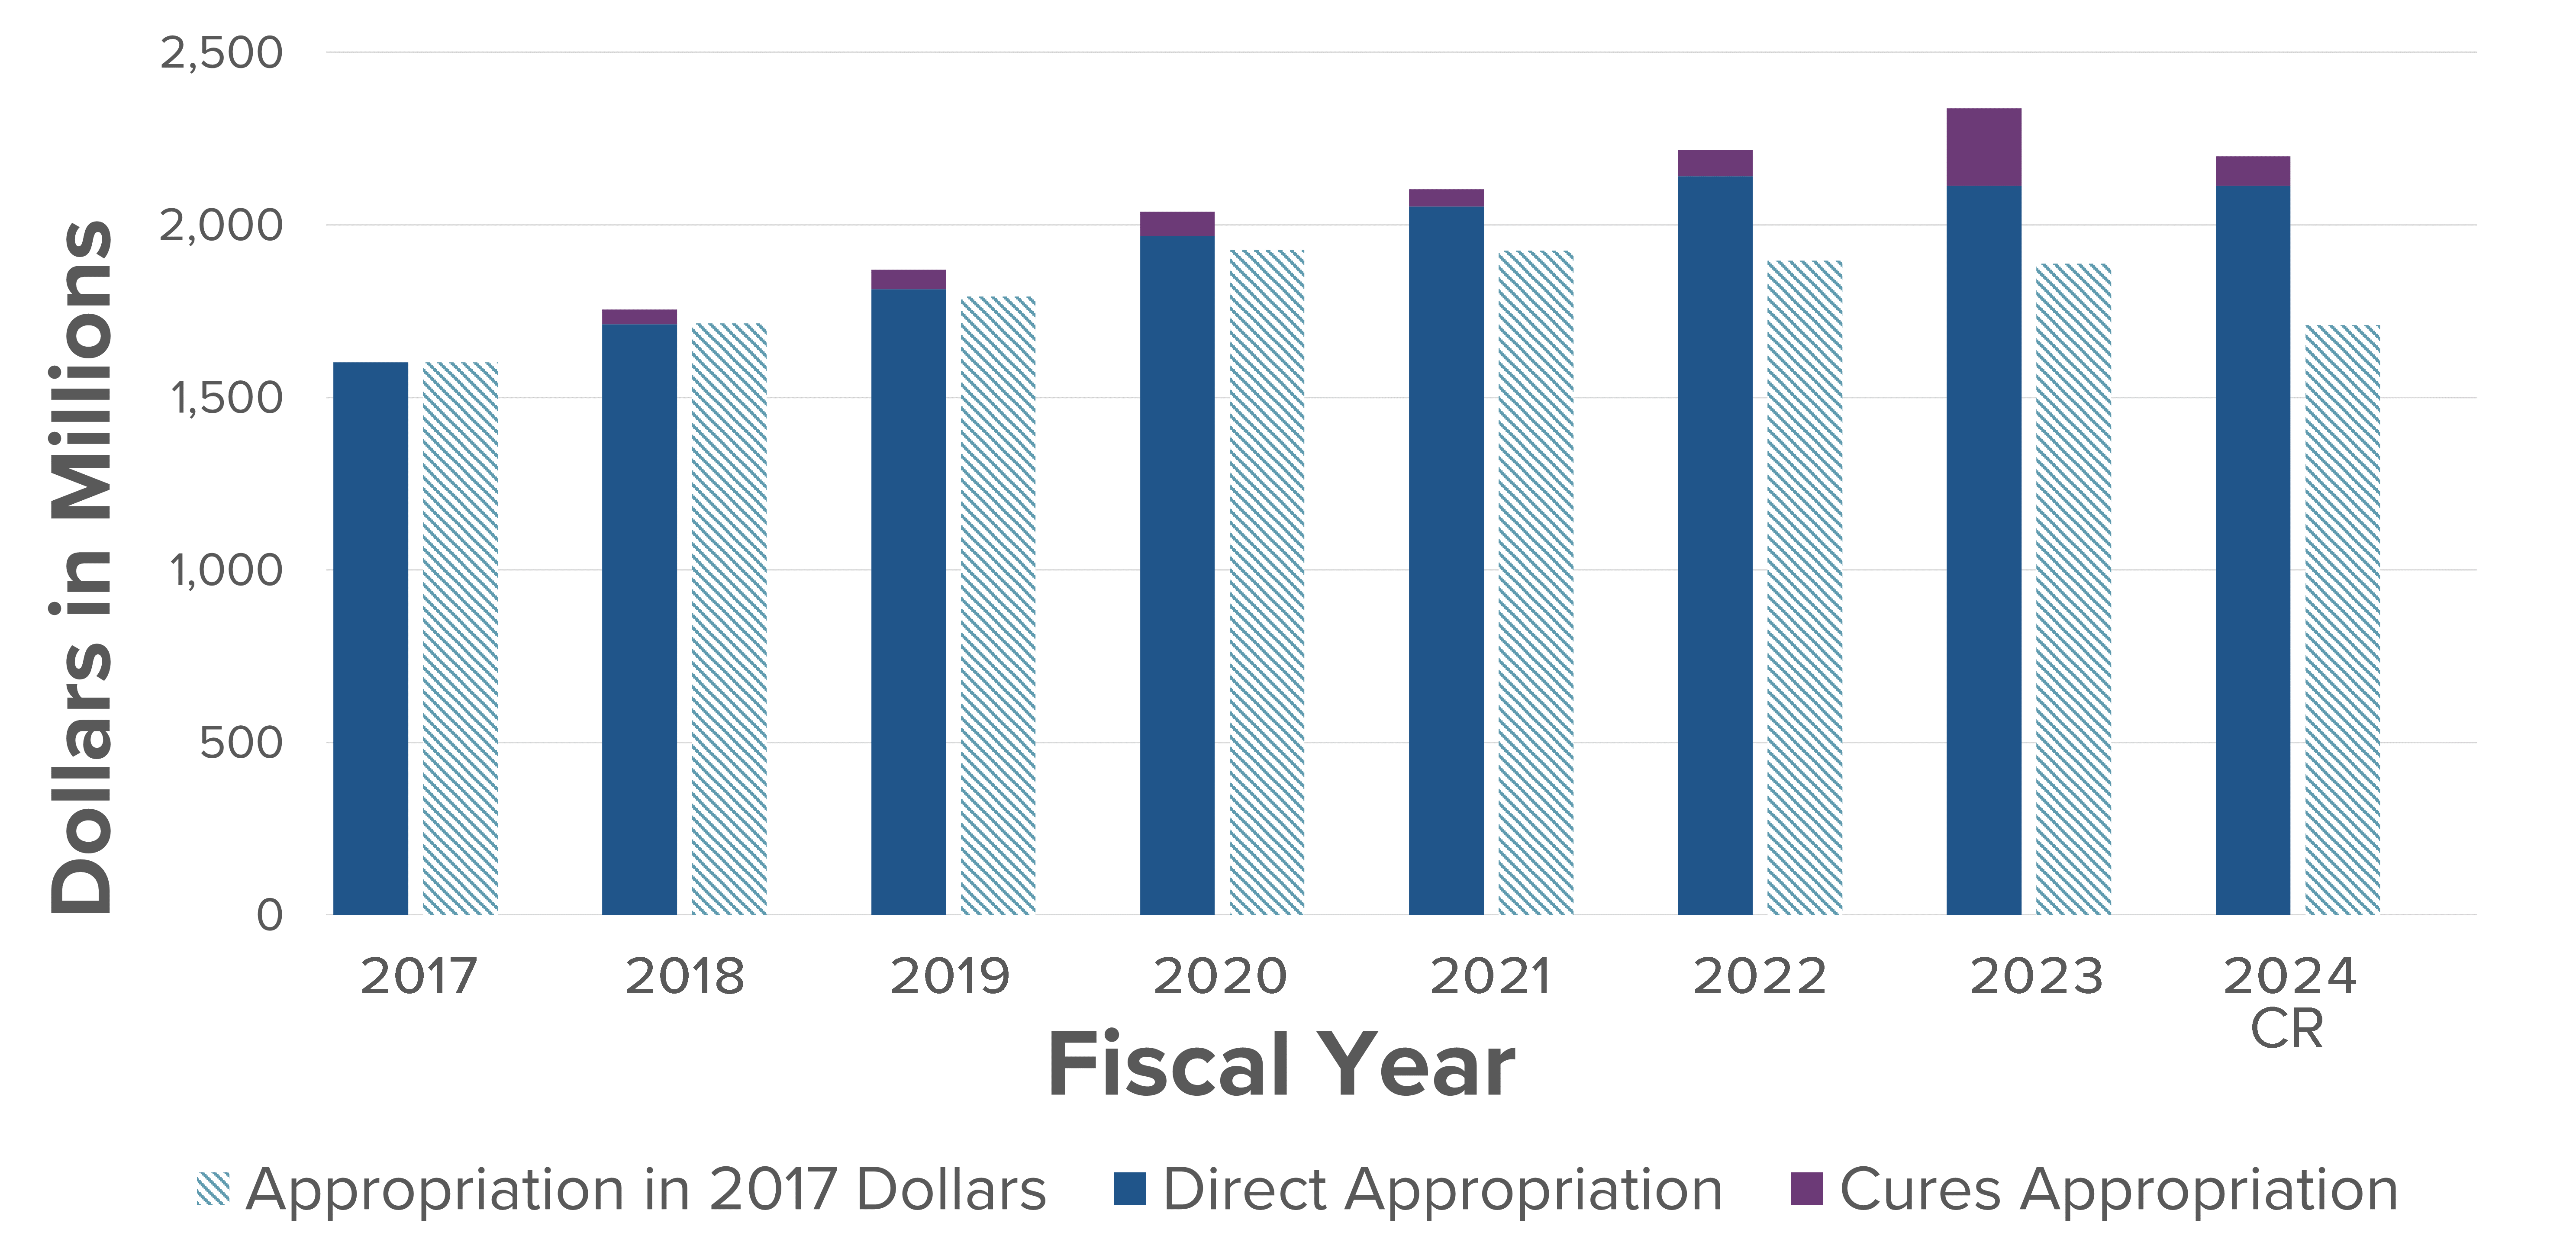 This vertical bar graph shows an upward trend in NIMH funding between fiscal years 2017 and 2024